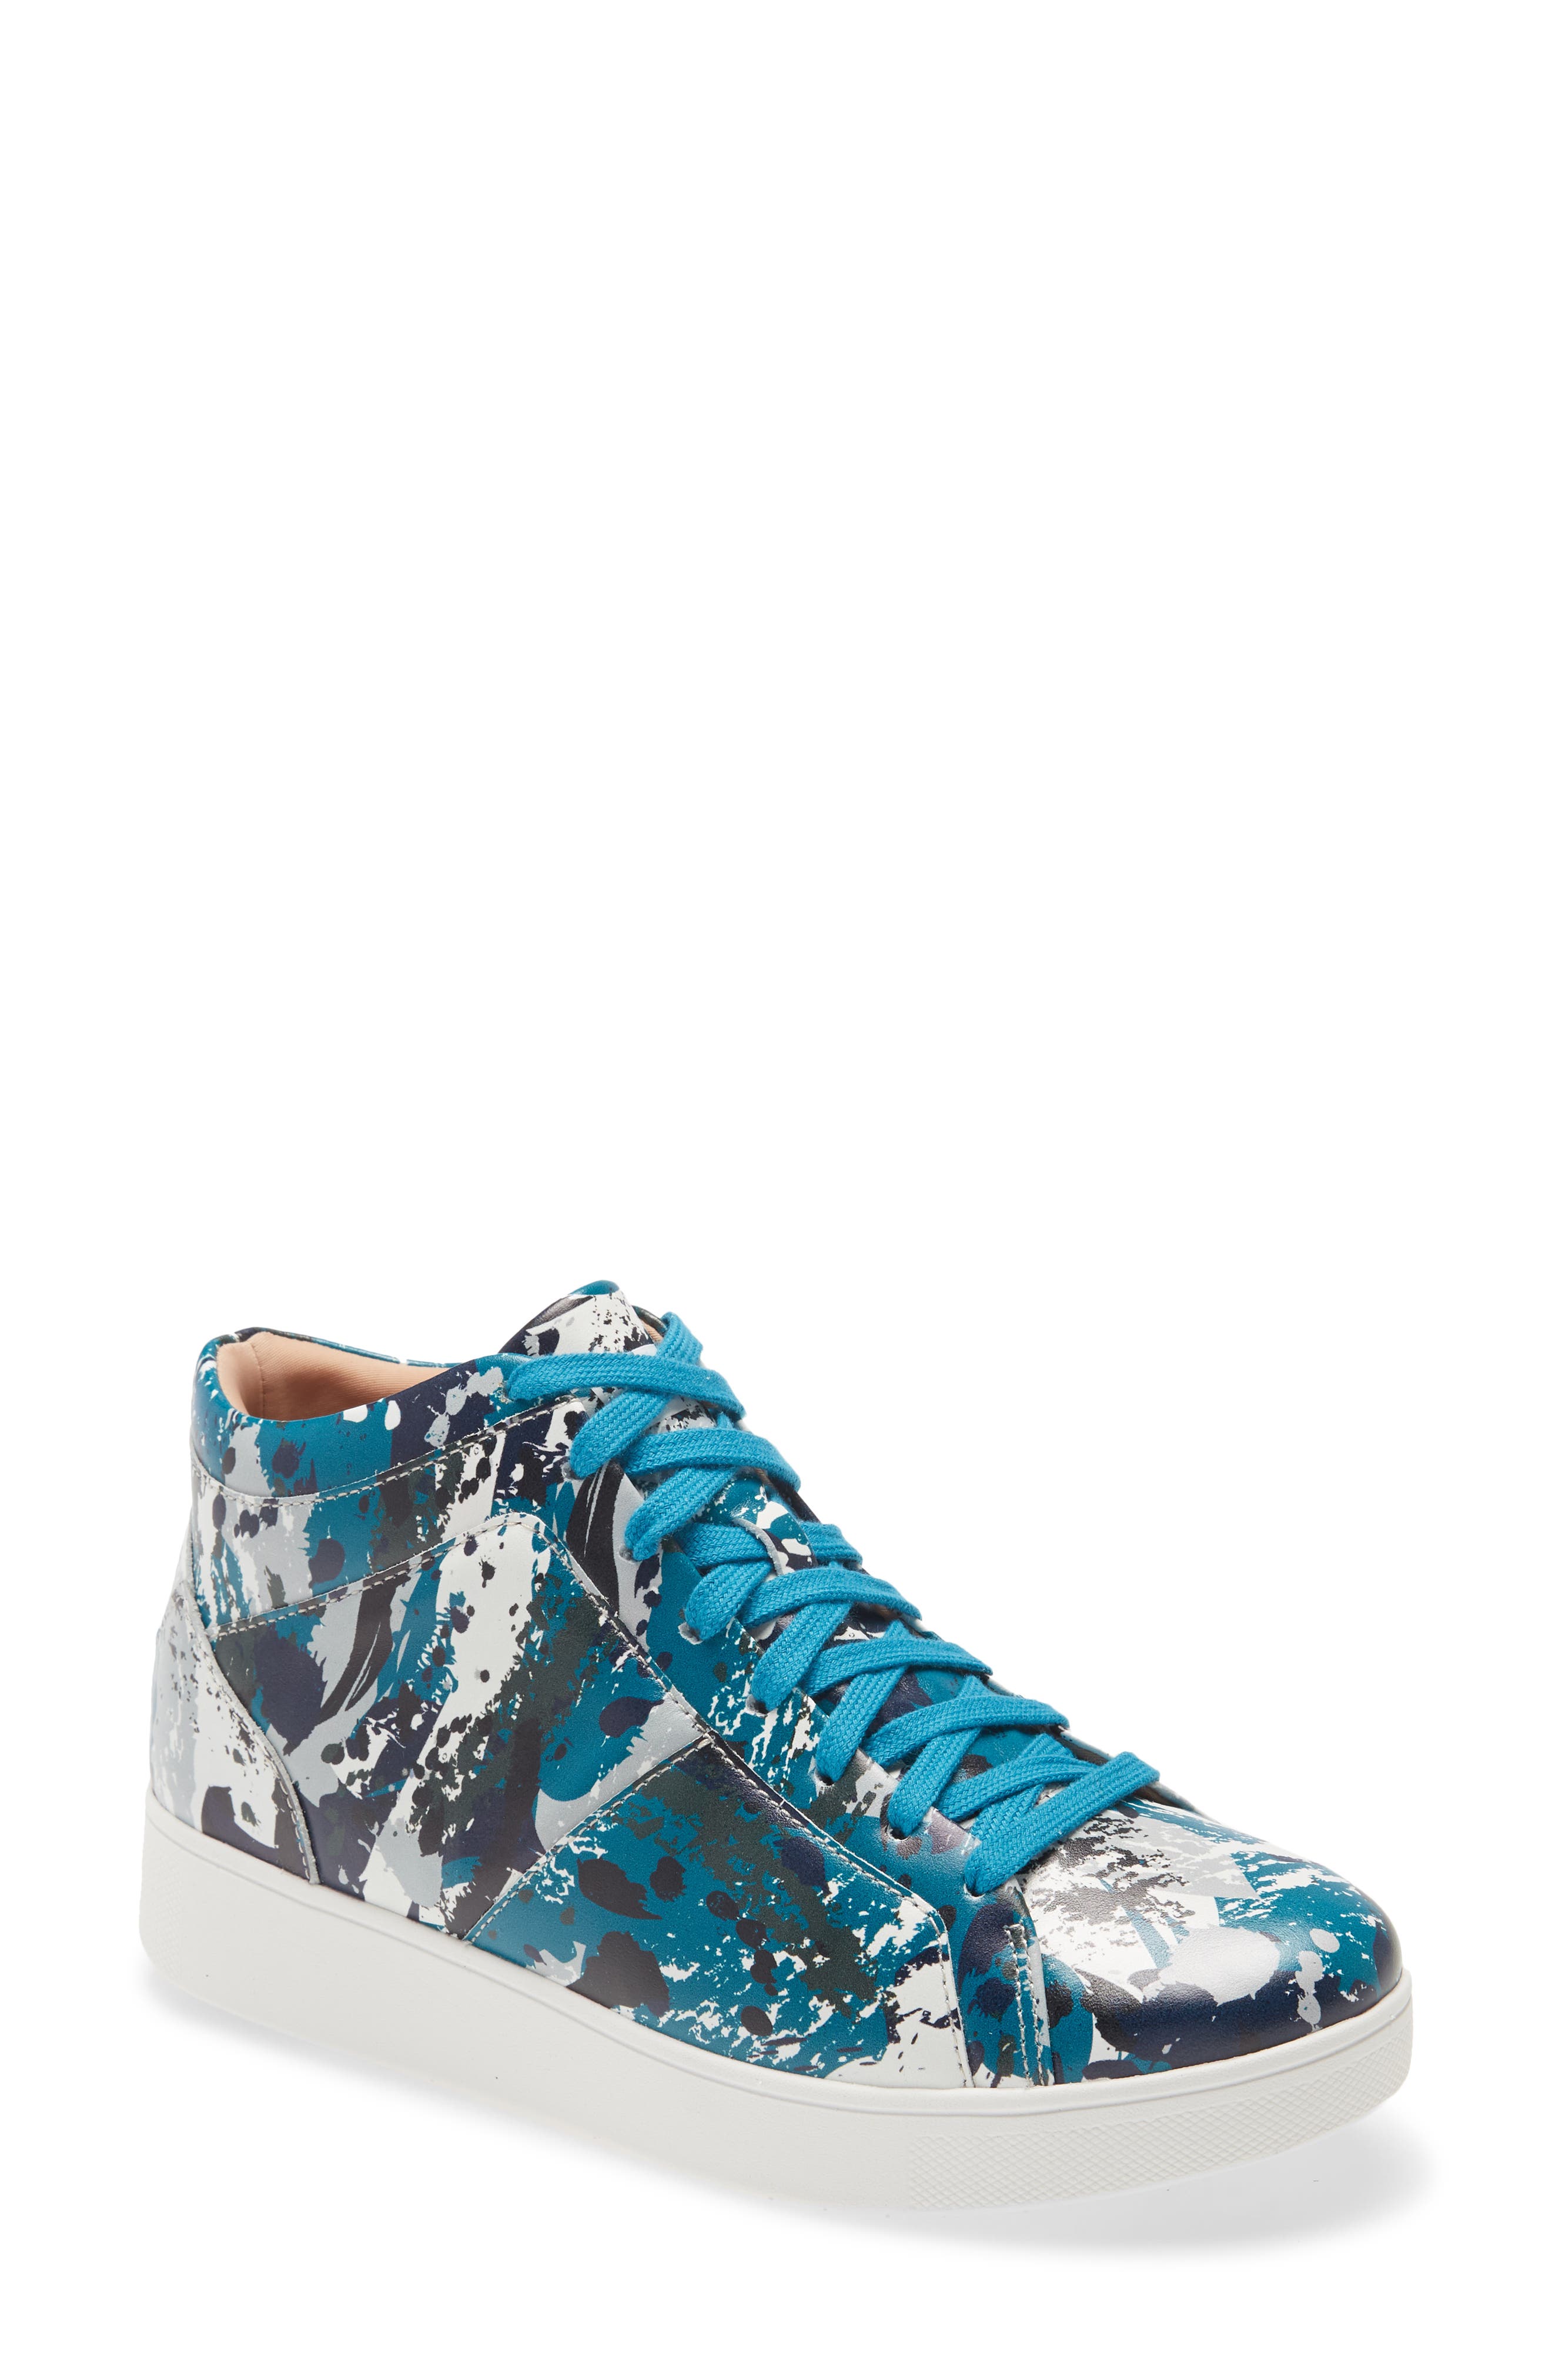 Fitflop Rally High Top Sneaker In Teal